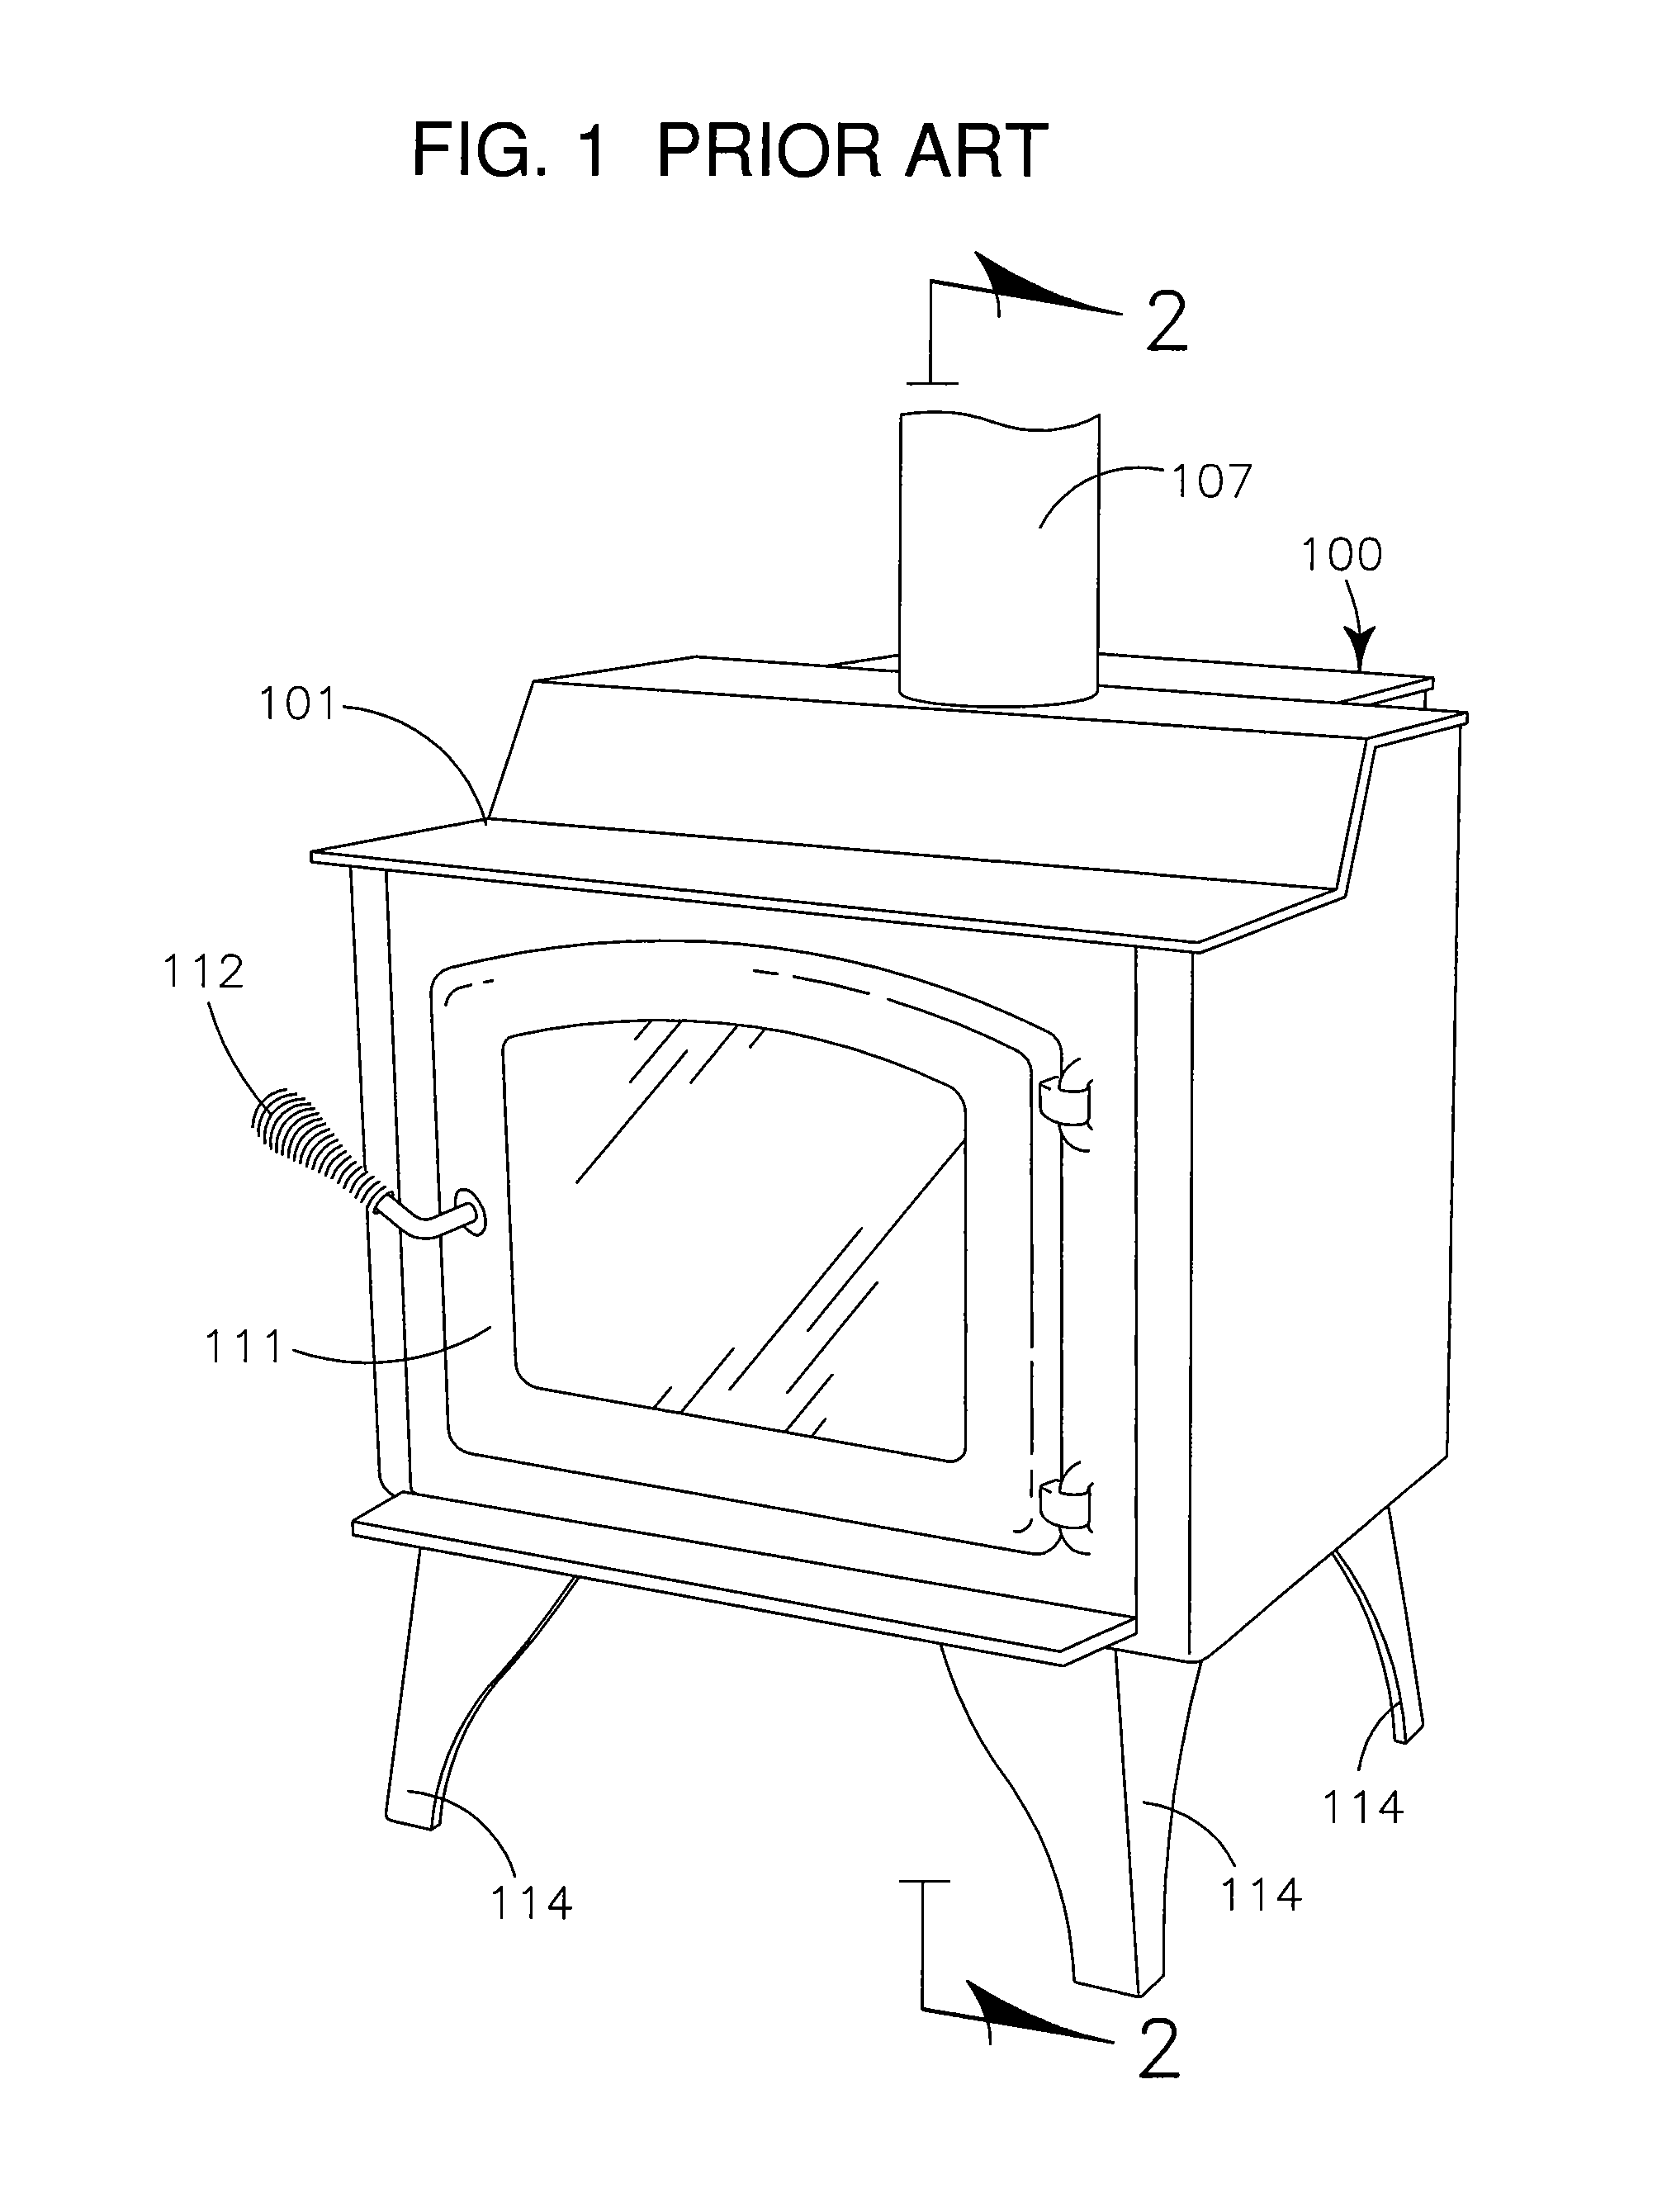 Vibratory feed mechanism for pellet fuel combustion device